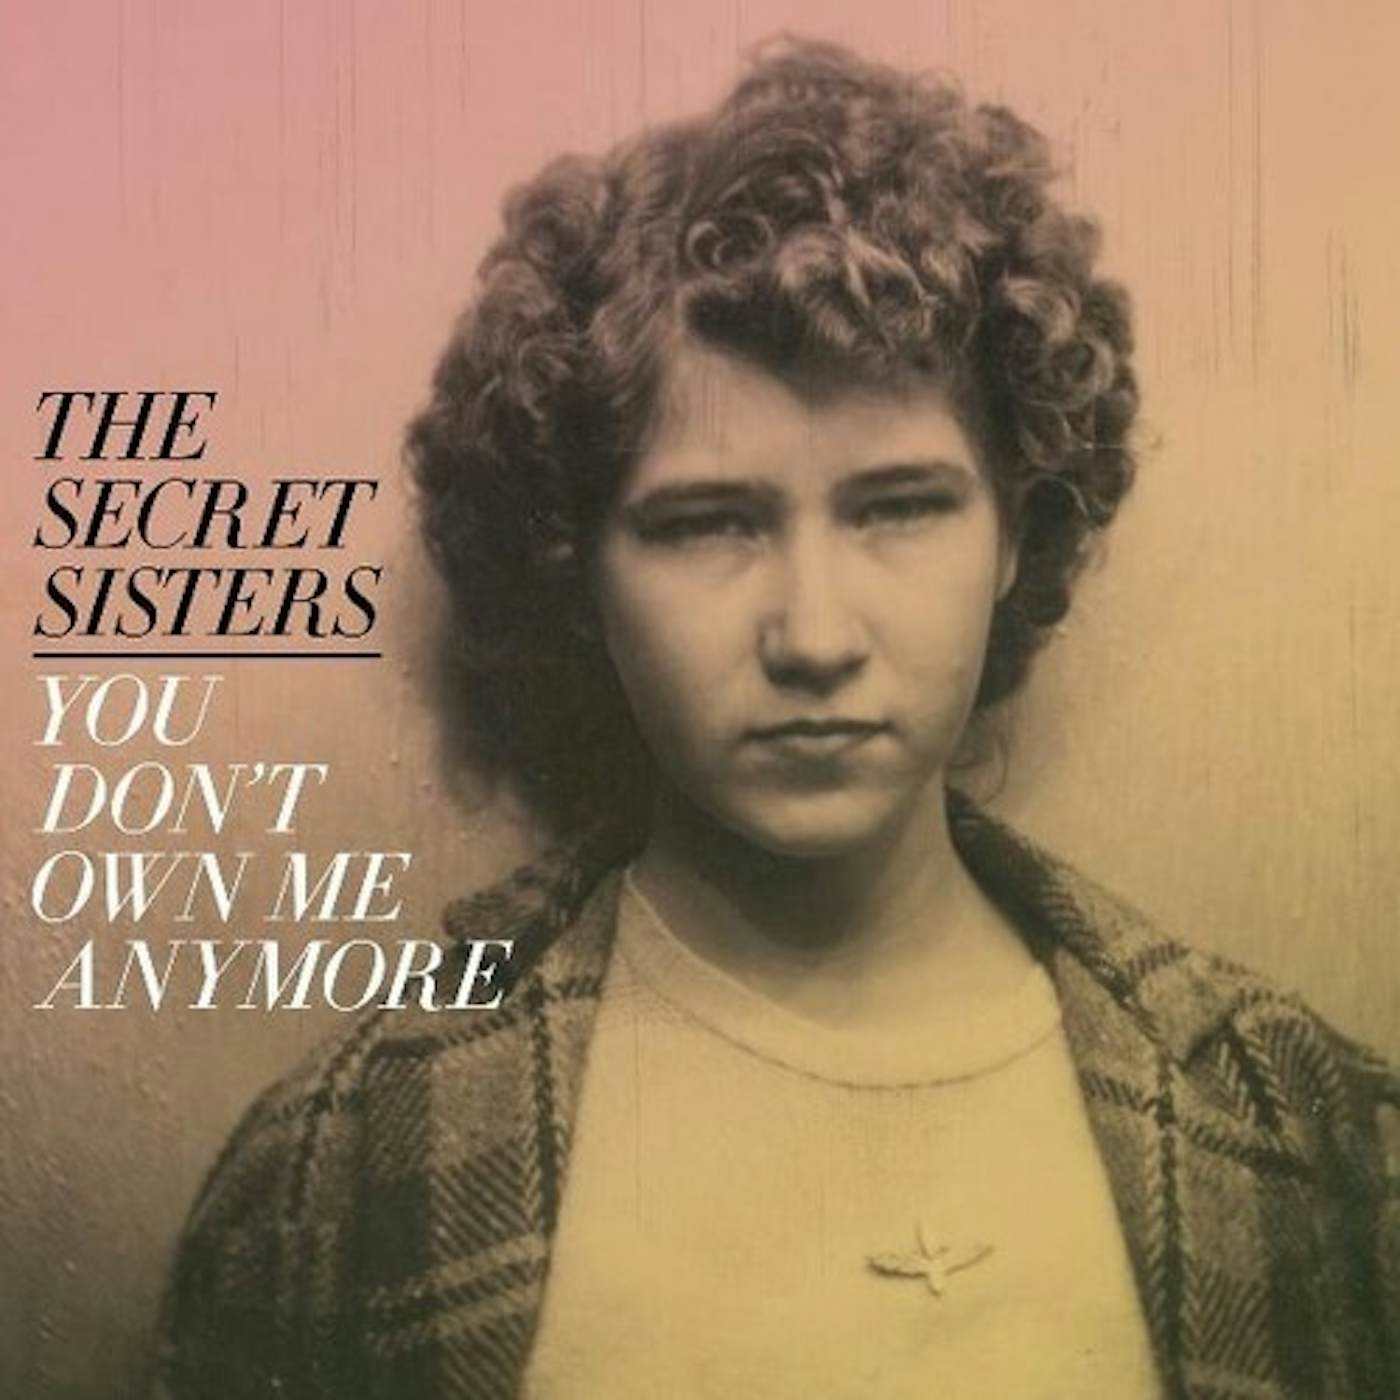 The Secret Sisters YOU DON'T OWN ME ANYMORE Vinyl Record